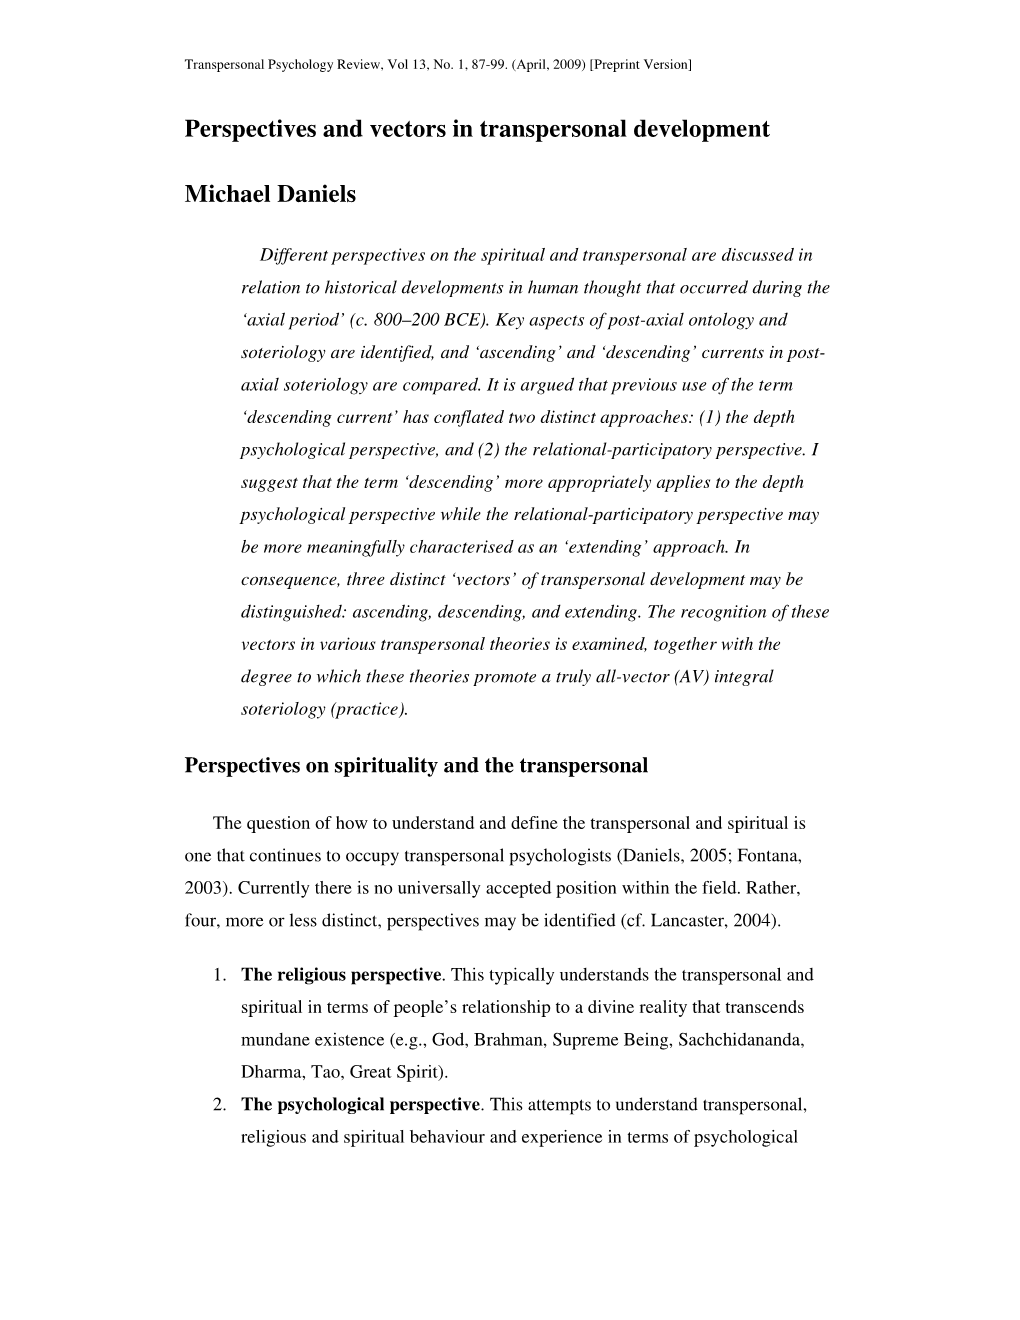 Perspectives and Vectors in Transpersonal Development Michael